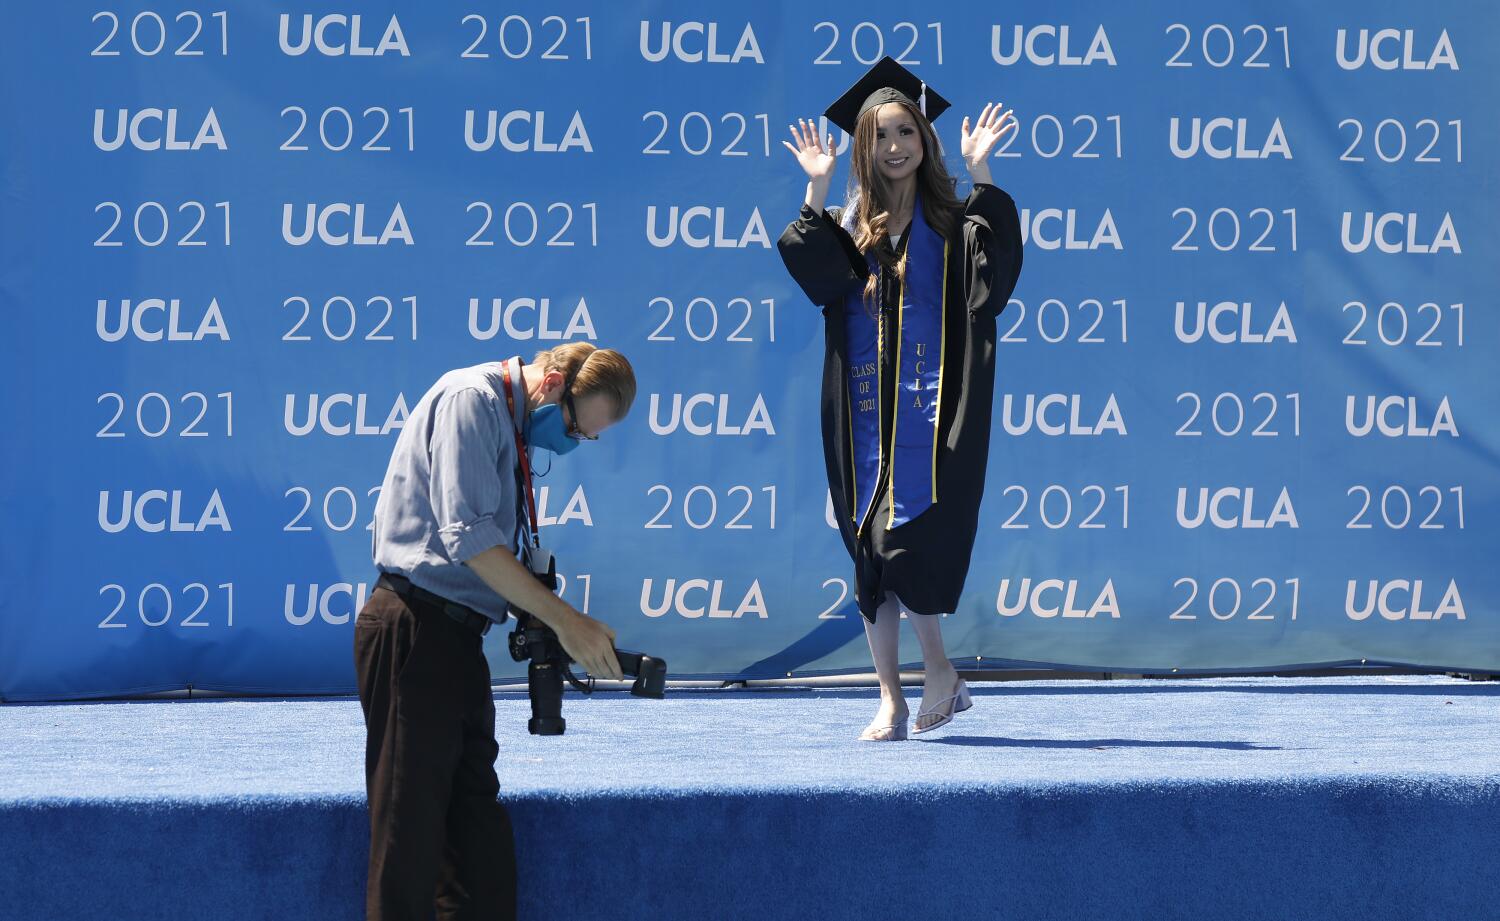 UCLA commencement goes on amid campus tension over protests, violence and policing